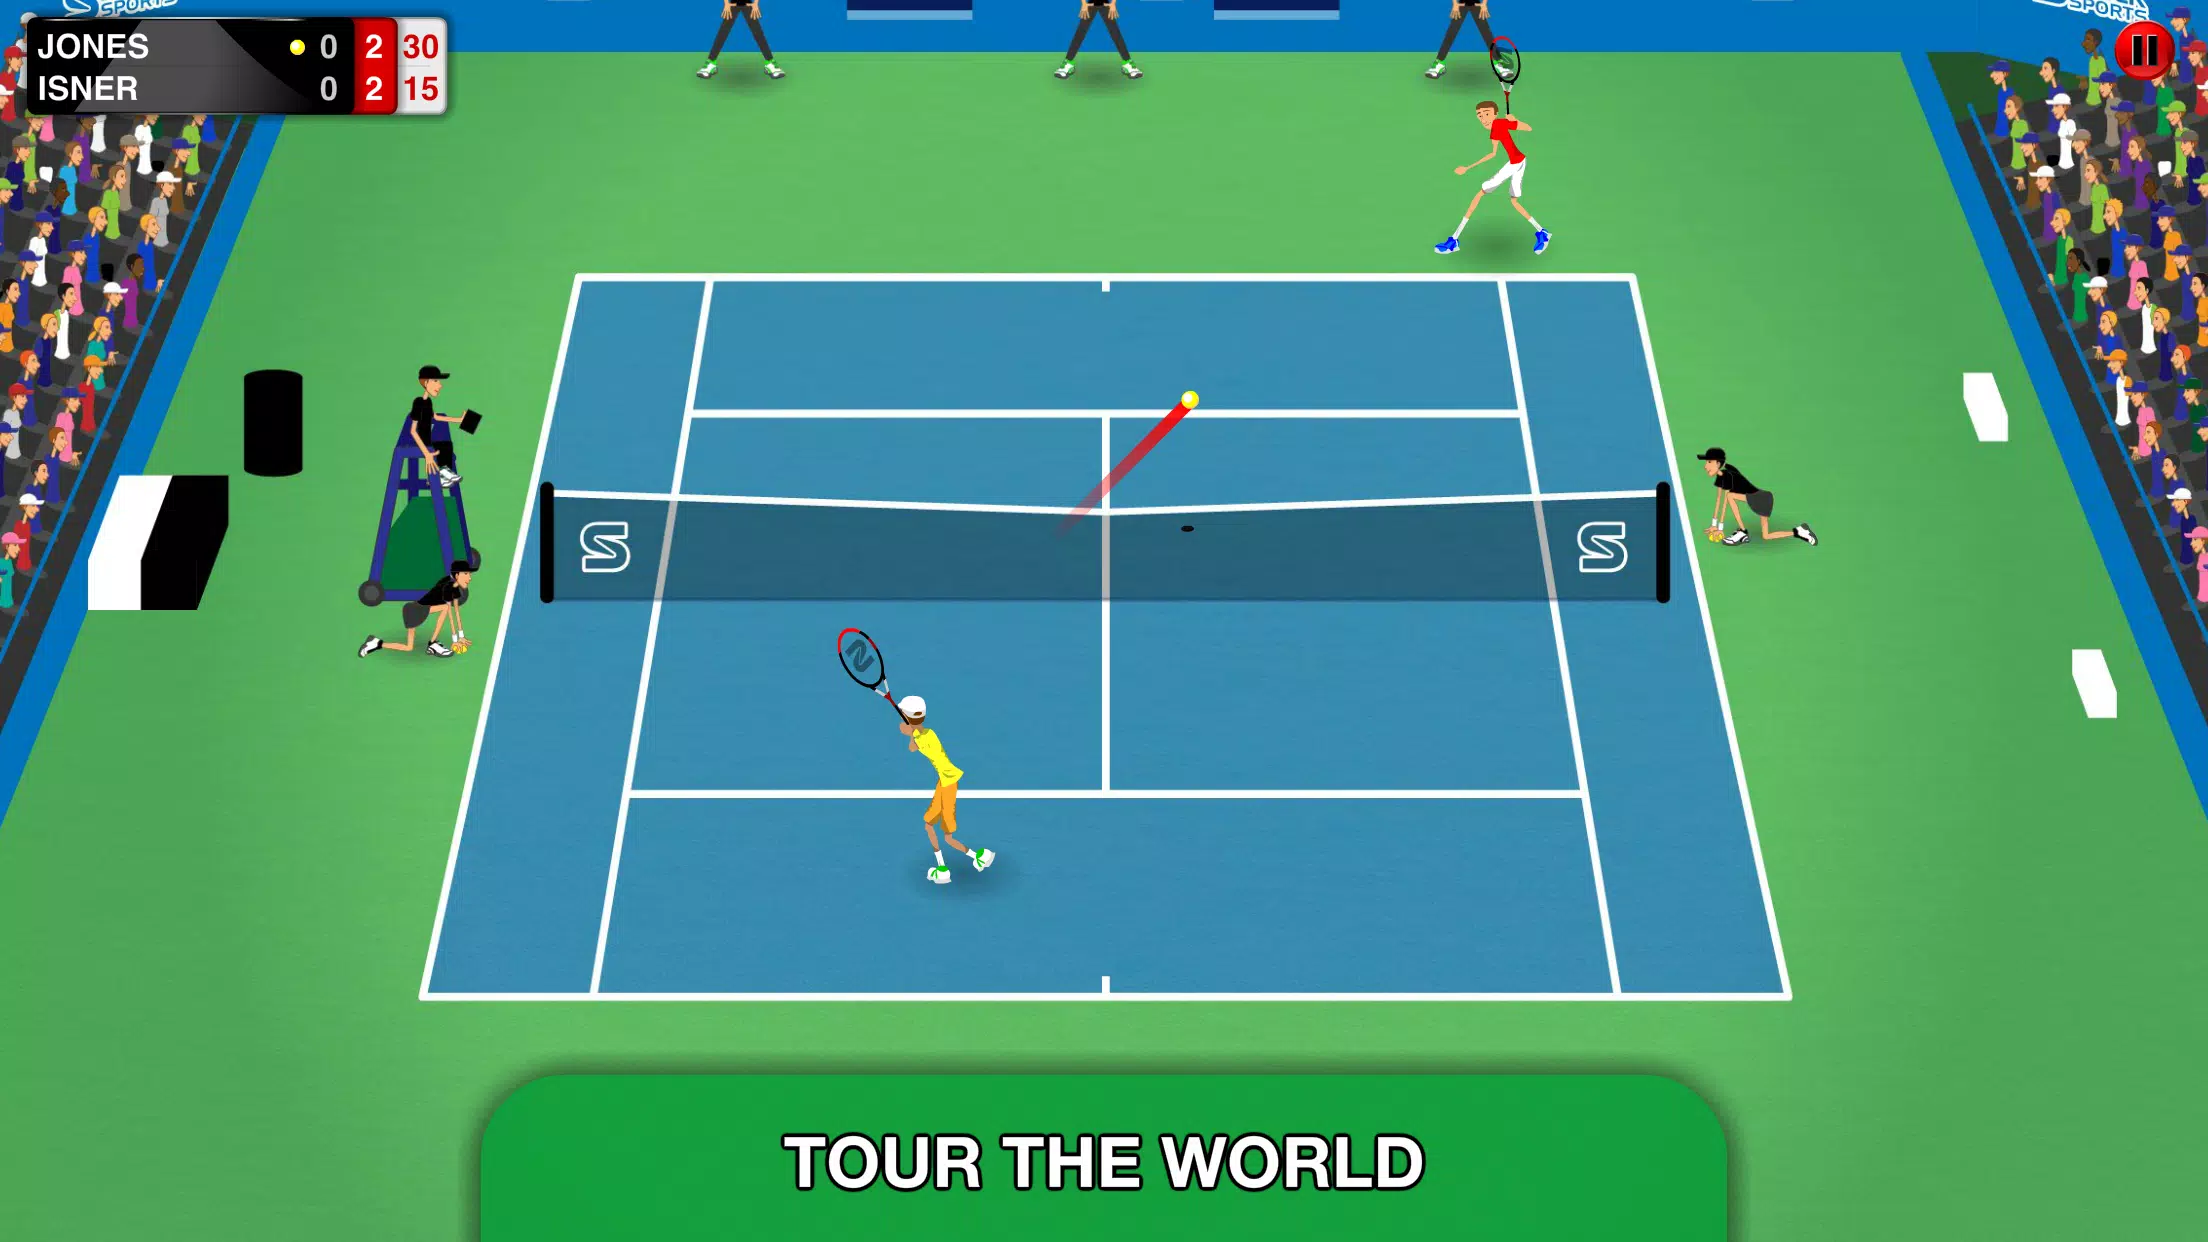 Stick Tennis Tour for Android - APK Download